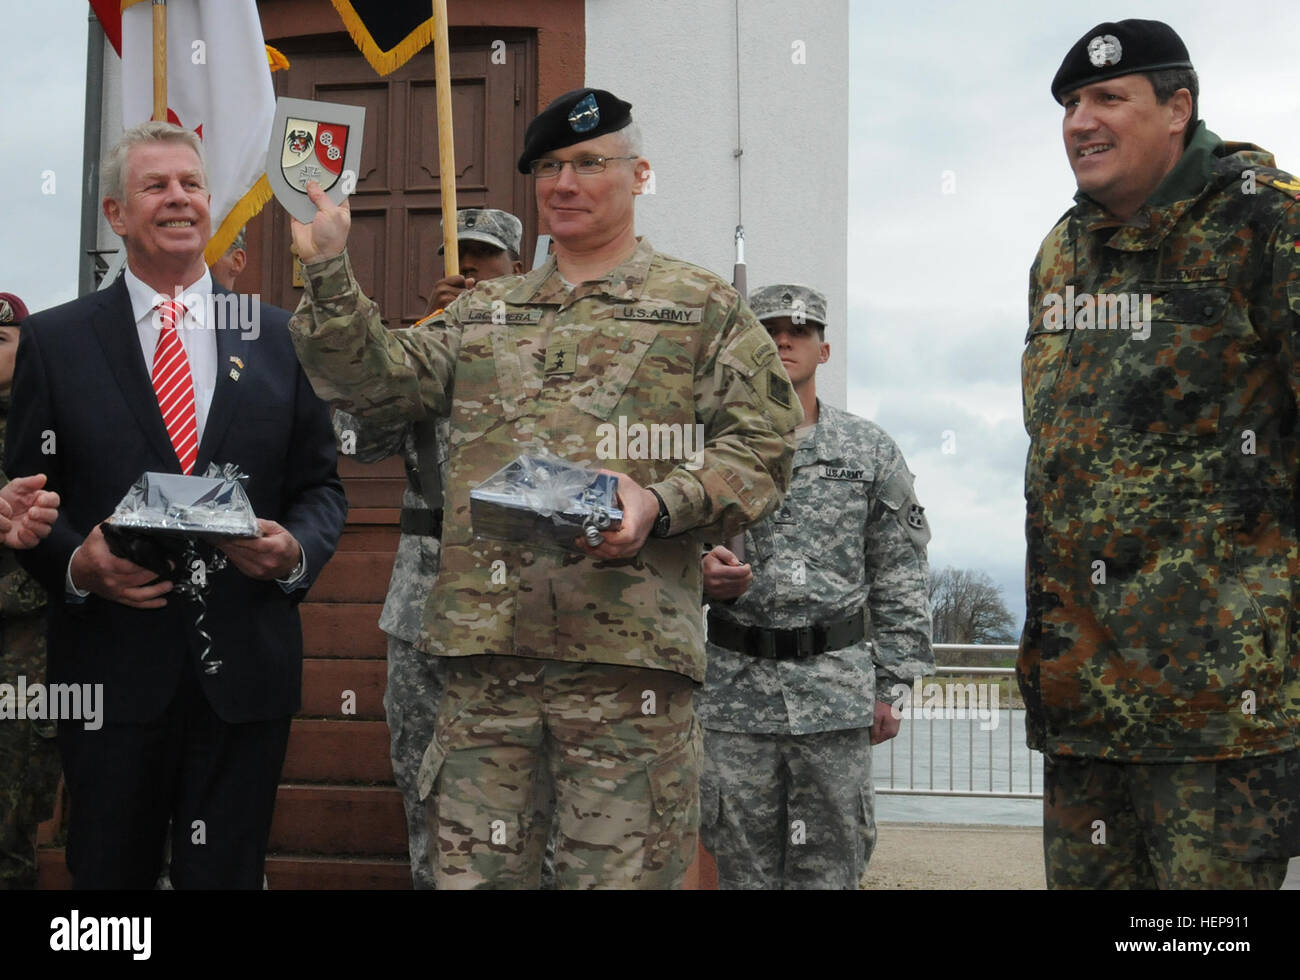 Commanding General Maj. Gen. Paul J. LaCamera, 4th Infantry Division and Joint Task Force Carson, receives a gift from the German army following a ceremony commemorating the 70th anniversary of the division crossing the Rhine River in Germany at Worms March 29. LaCamera is joined by Michael Kissel, lord mayor of Worms, and German Brig. Gen. Markus Laubenthal, U.S. Army Europe chief of staff. Worms gifts 150401-A-UK001-006 Stock Photo